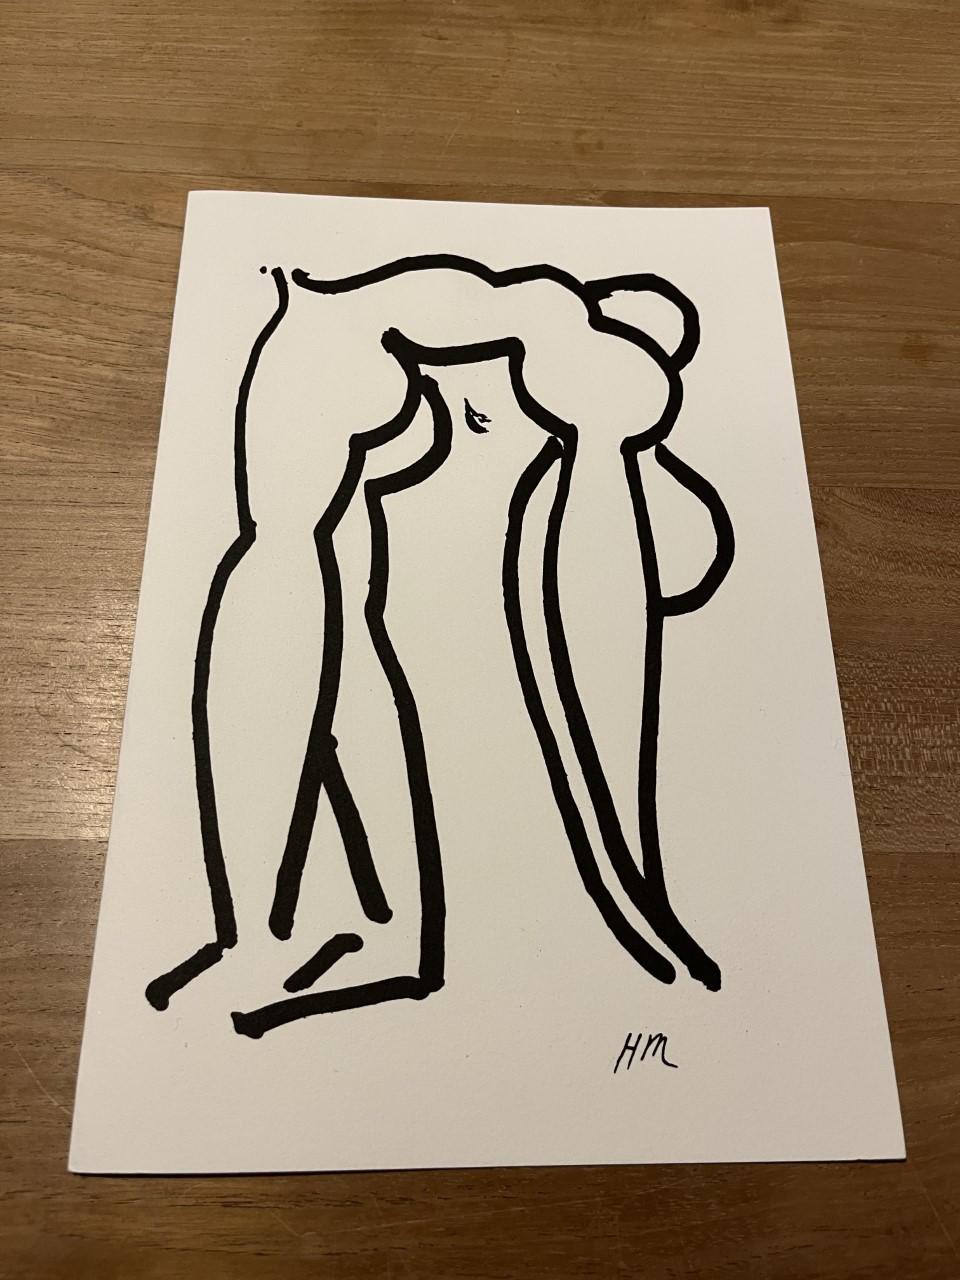 Acrobate - 2007 - Plate signed - Henri Matisse - Color Lithograph - Fauvist Print by (after) Henri Matisse